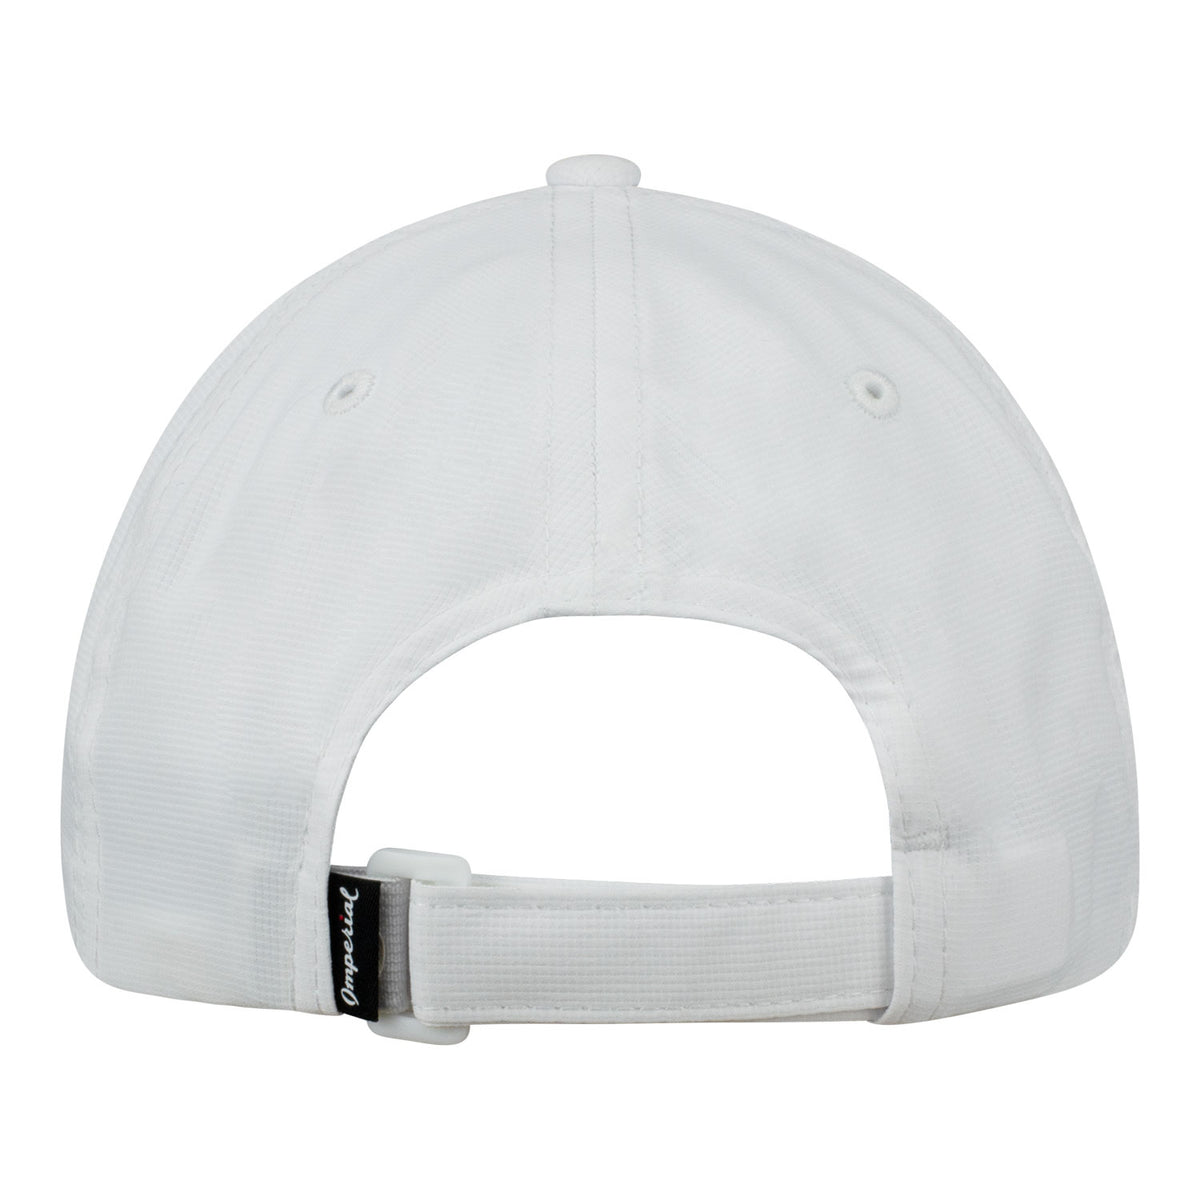 Imperial 2025 PGA Championship Original Performance Hat in White - Back View